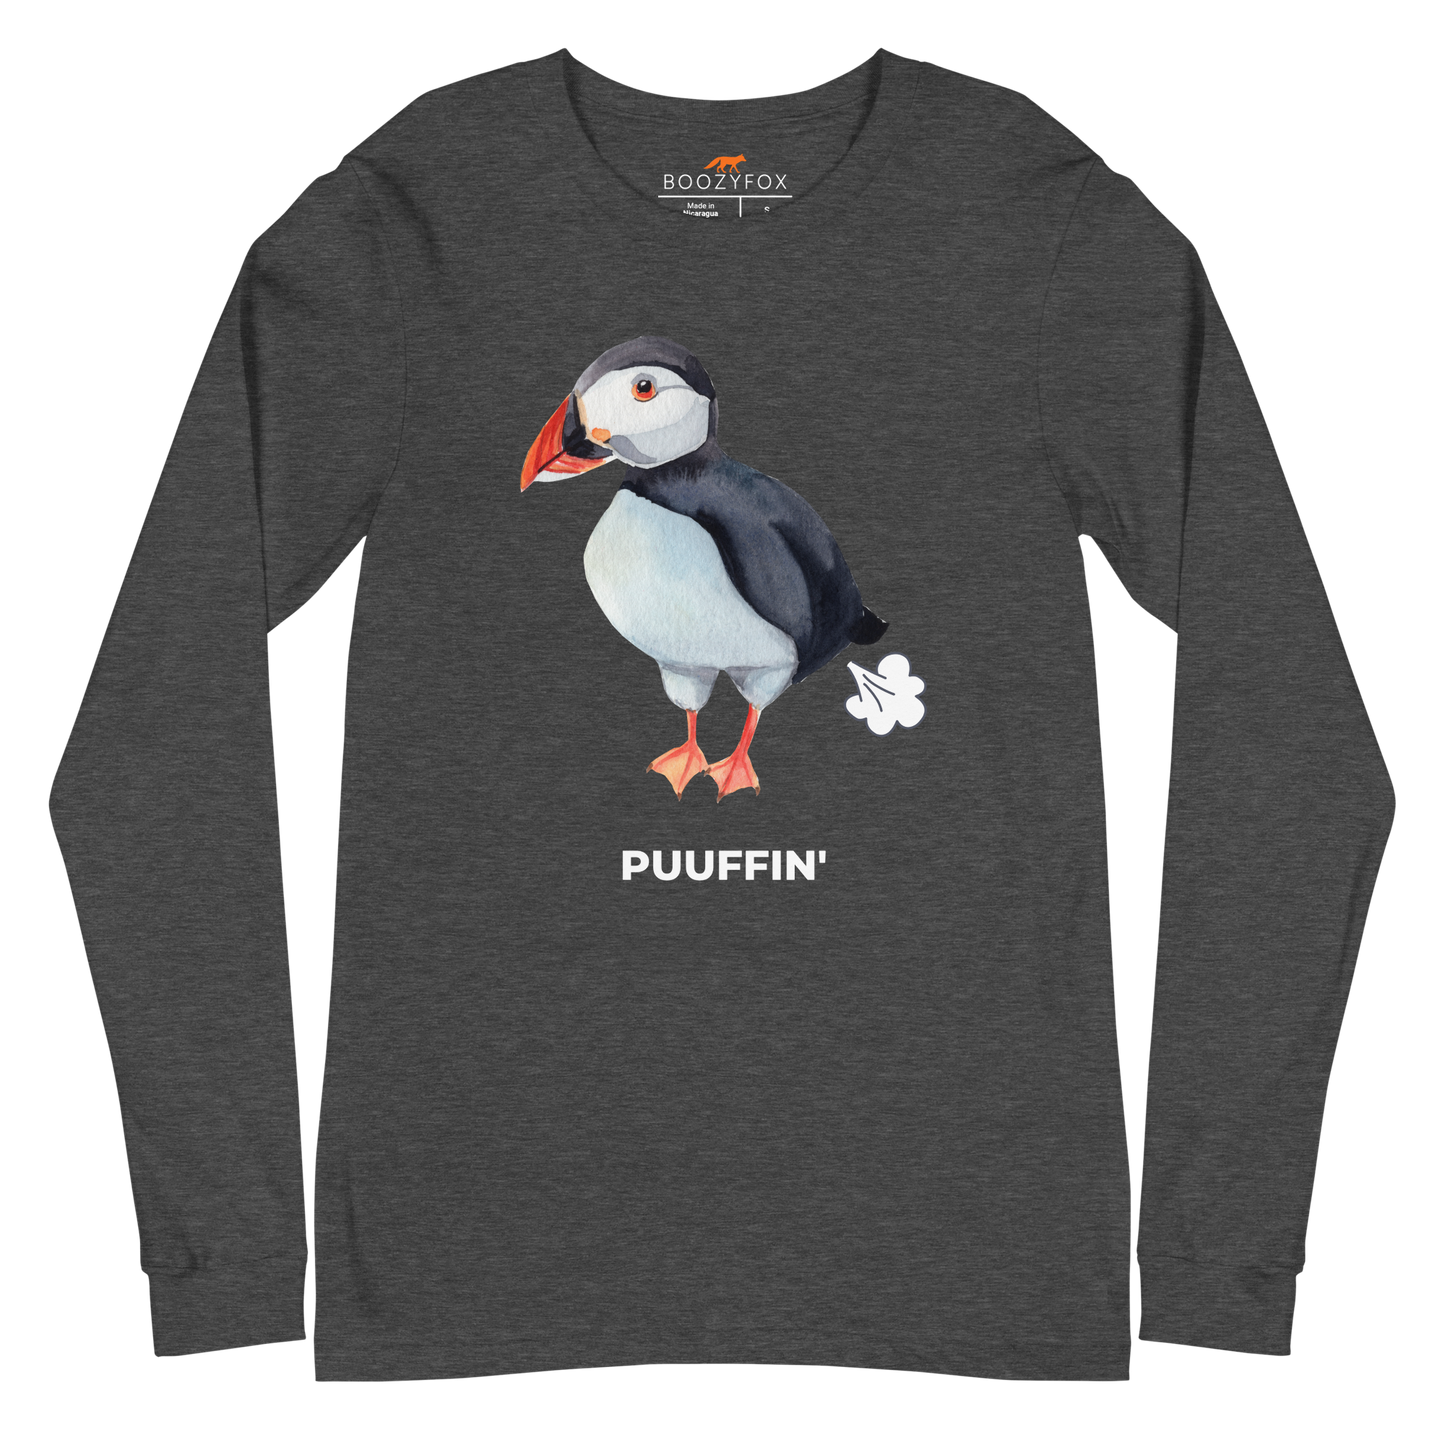 Dark Grey Heather Puffin Long Sleeve Tee featuring a comic Puuffin' graphic on the chest - Funny Puffin Long Sleeve Graphic Tees - Boozy Fox